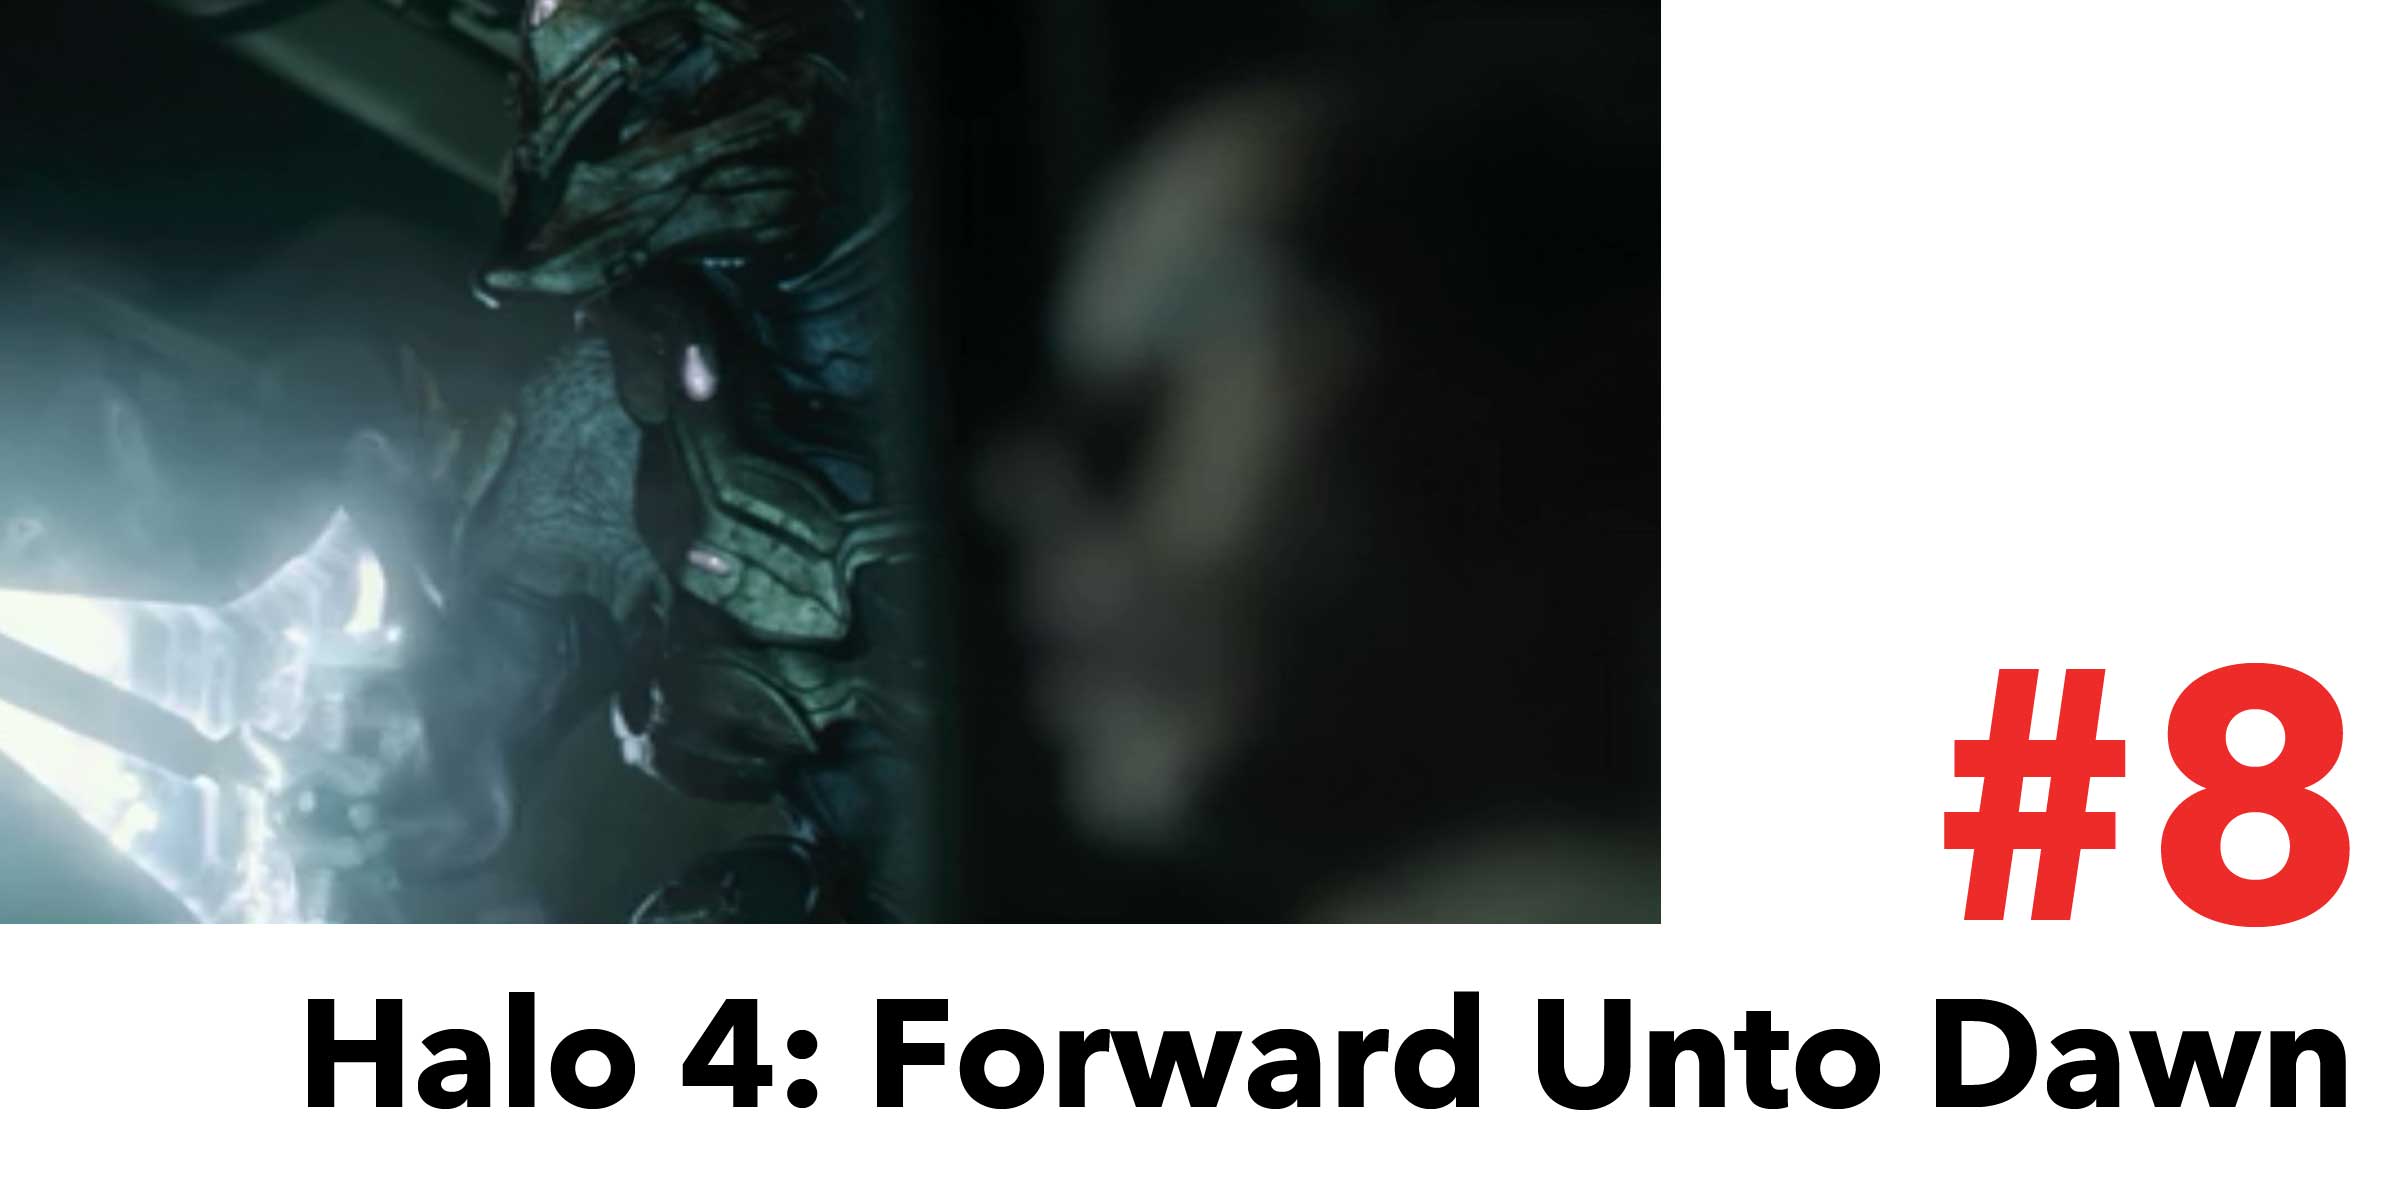 Halo 4: Forward Unto Dawn is #8 in the Top 10 Post Apocalyptic Movies on Netflix. Pictured, an alien Elite, aka Sangheili, stalks a group of humans with his energy sword.